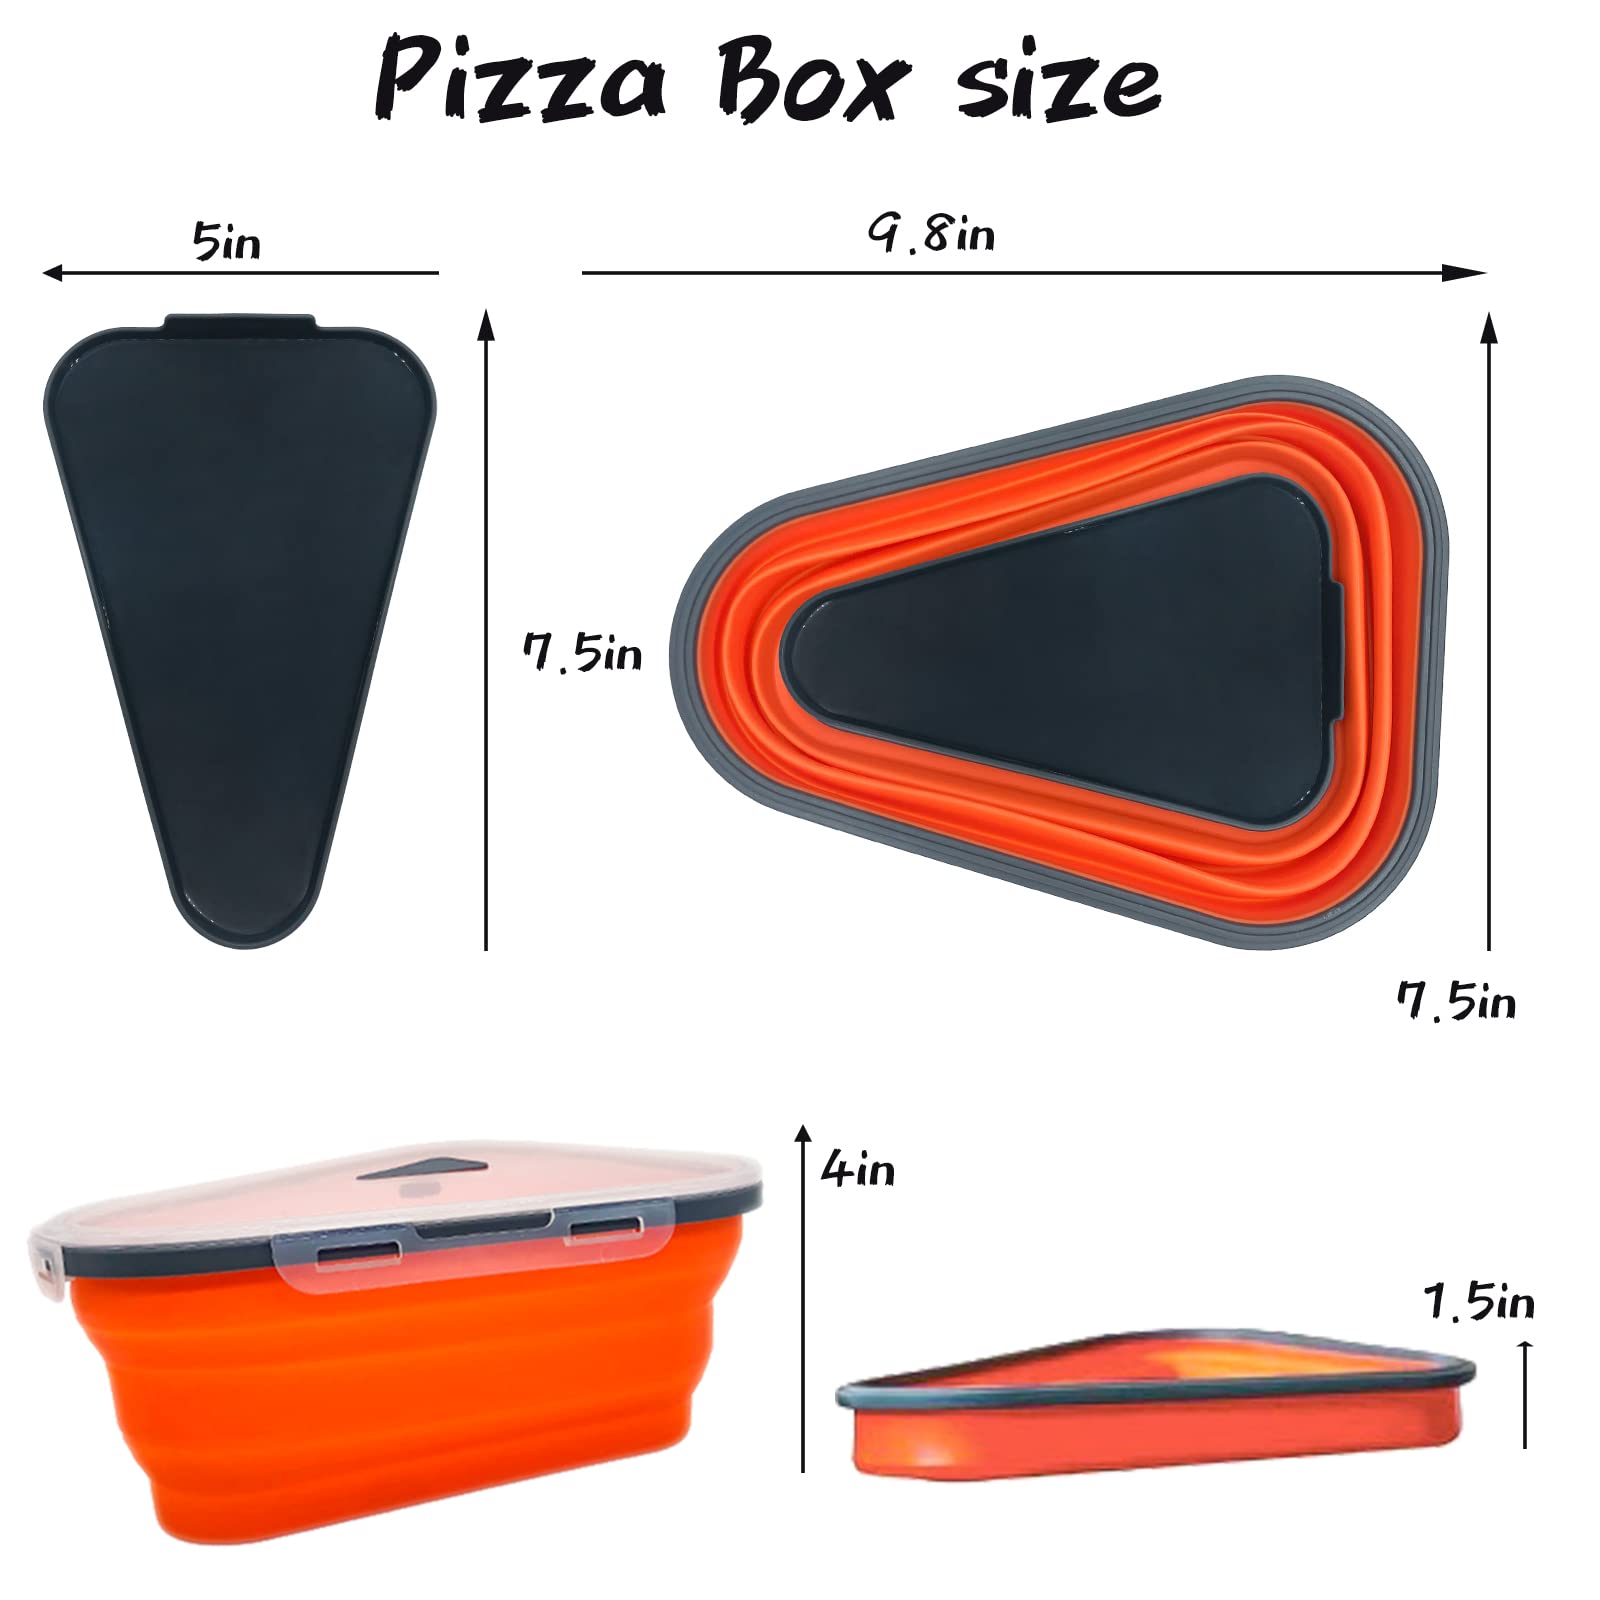 Farisod Pizza Storage Container Expandable,Pizza Container with 5 Microwavable Serving Trays,Adjustable Pizza Slice Container,Easy to Organize Pizza Storage, Saving Space,Microwave Safe (Black)